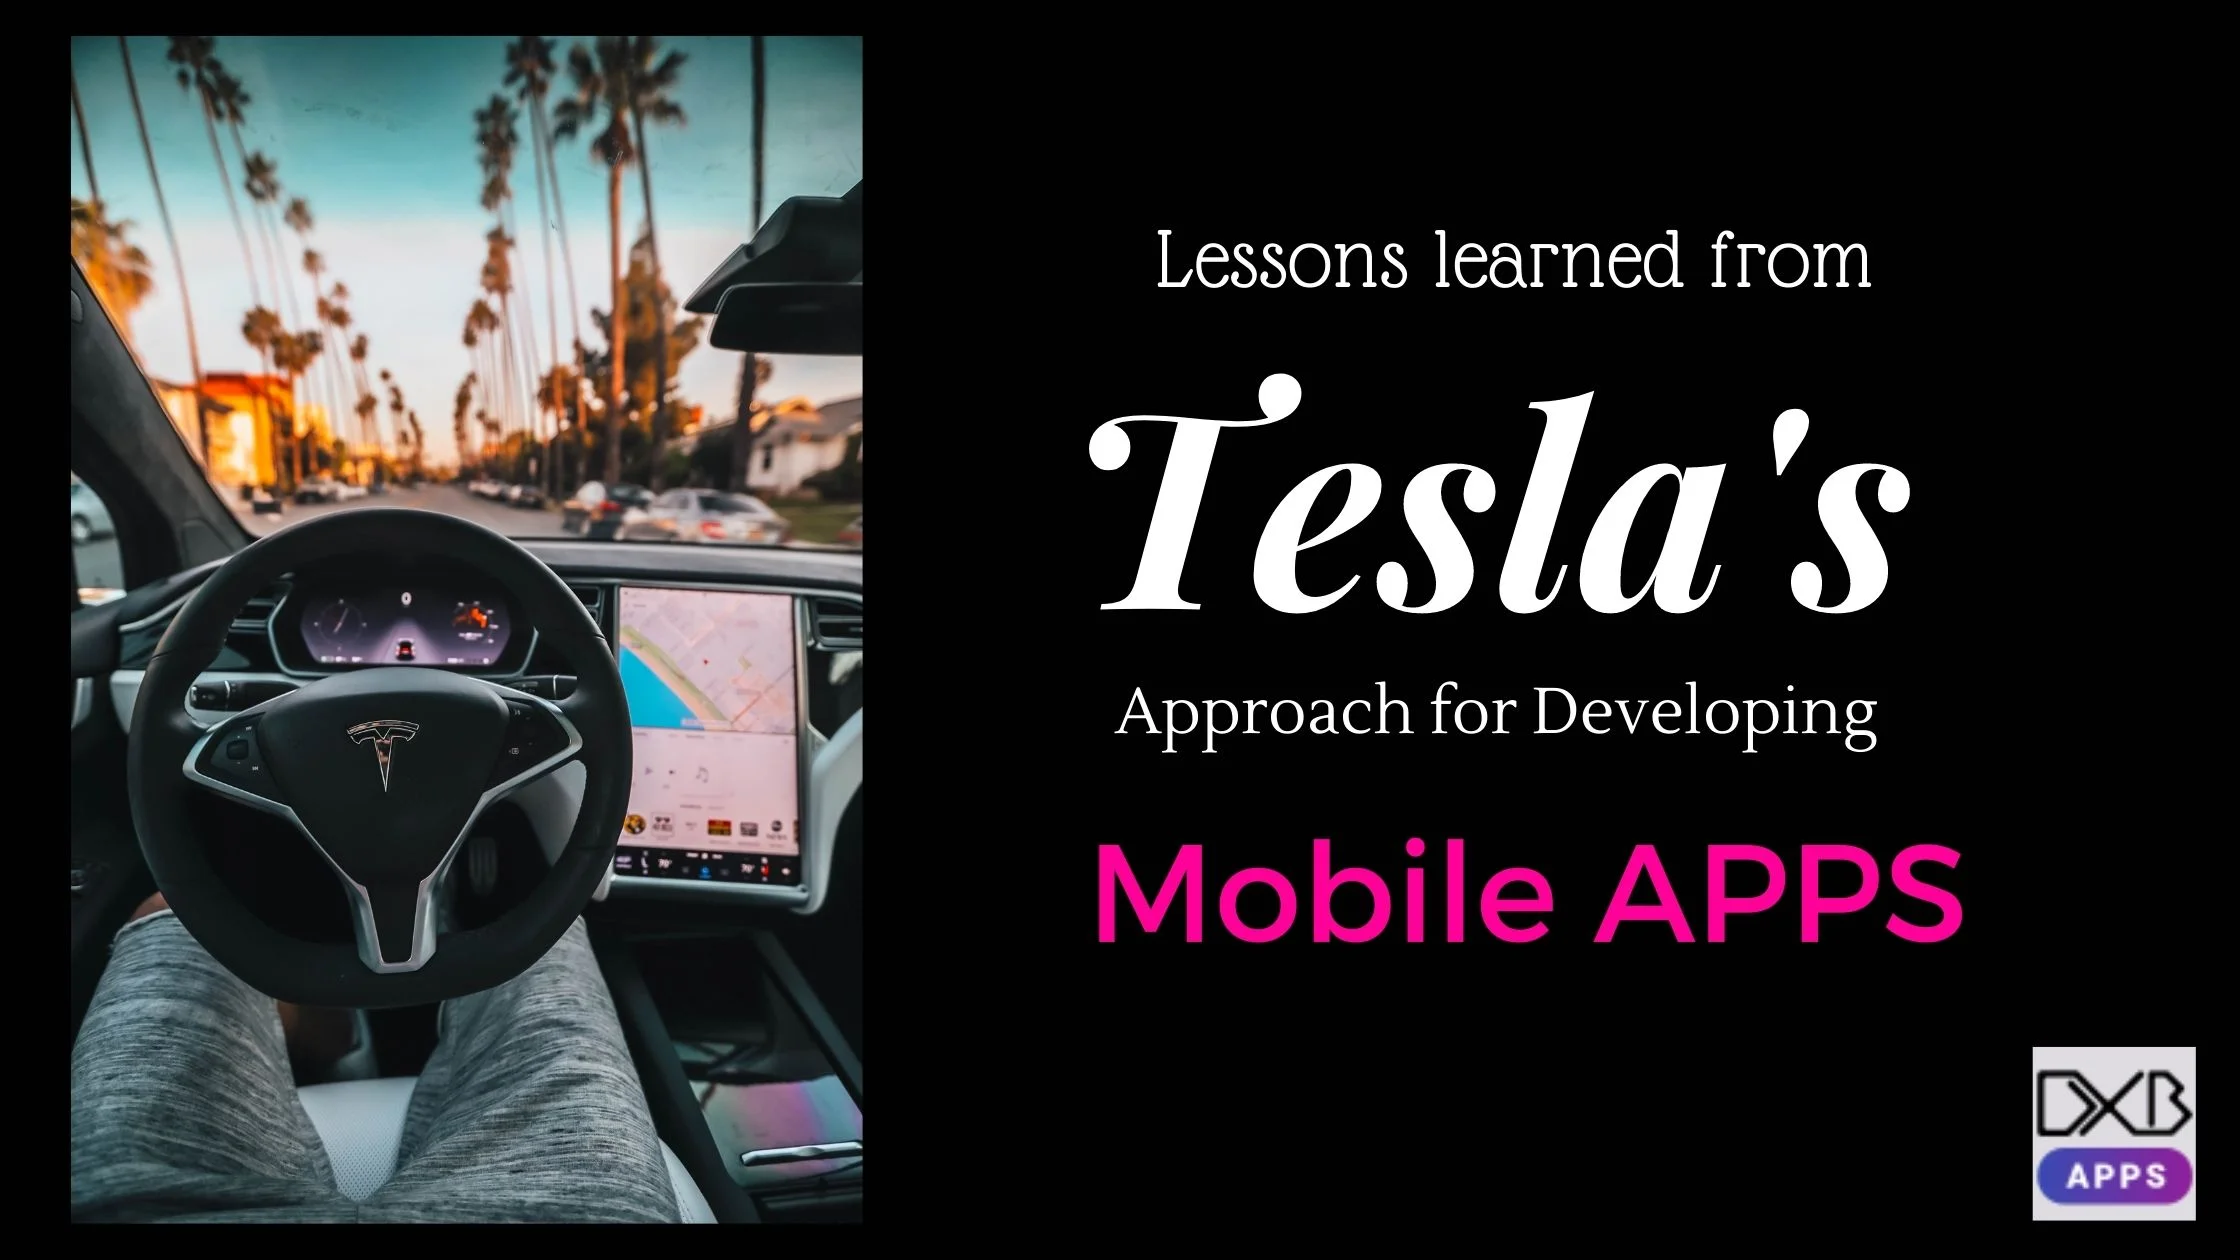 Lessons learned from Tesla’s Approach for Developing Mobile APPS